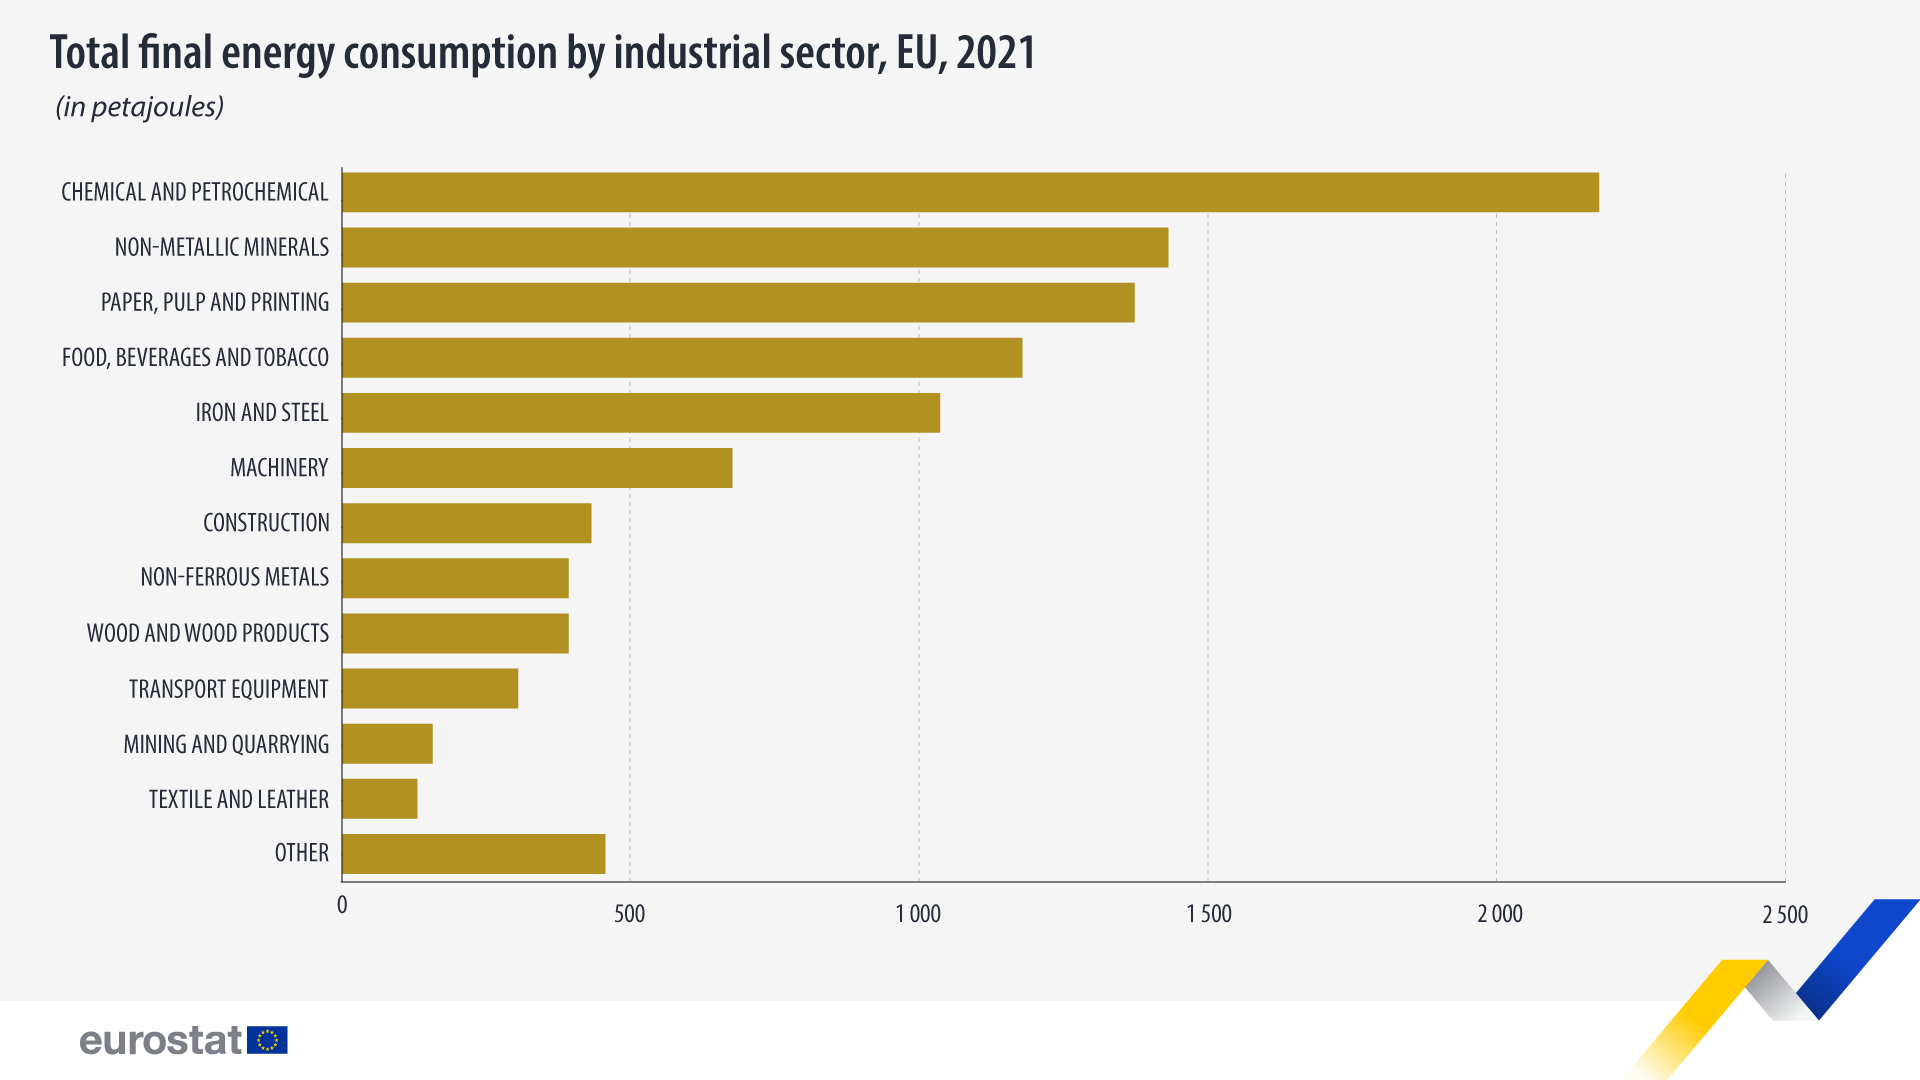 Bar chart: Total final energy consumption by industrial sector, in petajoules, EU, 2021